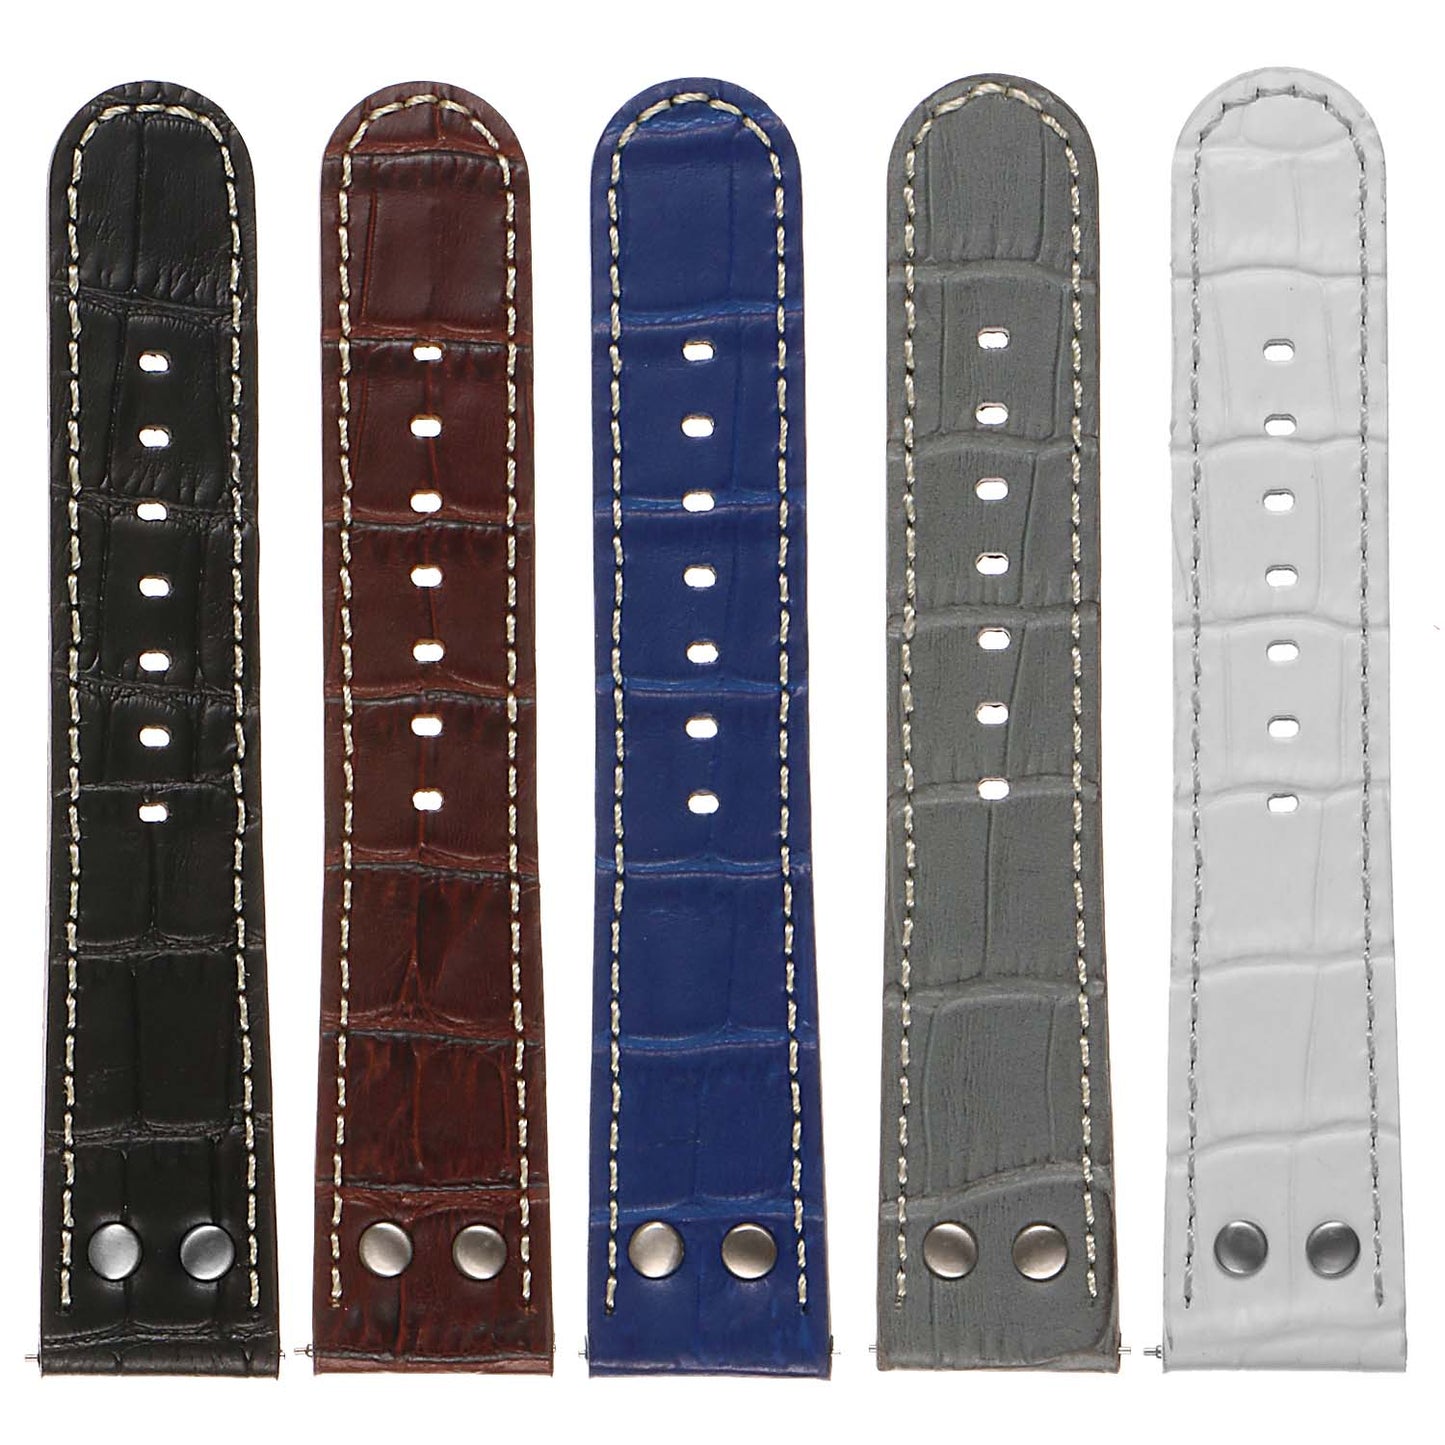 DASSARI Croc Embossed Leather Pilot Watch Band for Samsung Galaxy Watch Active